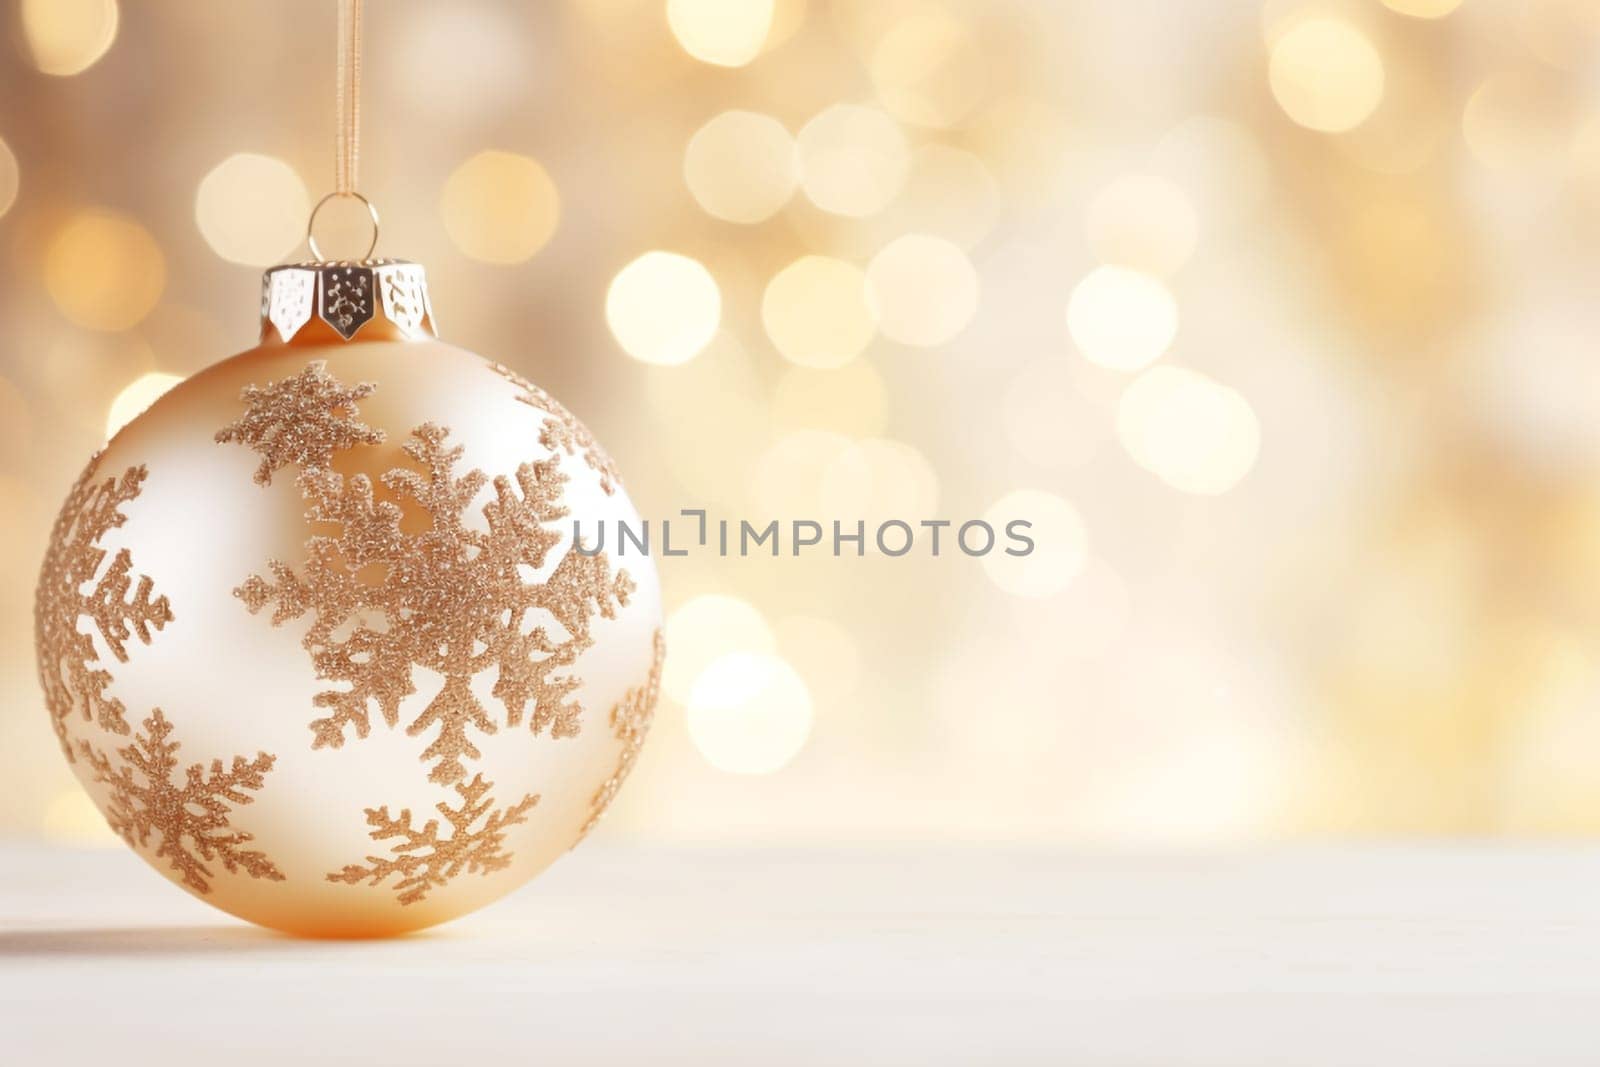 "Golden Christmas balls with snowflake on golden background, by Ciorba